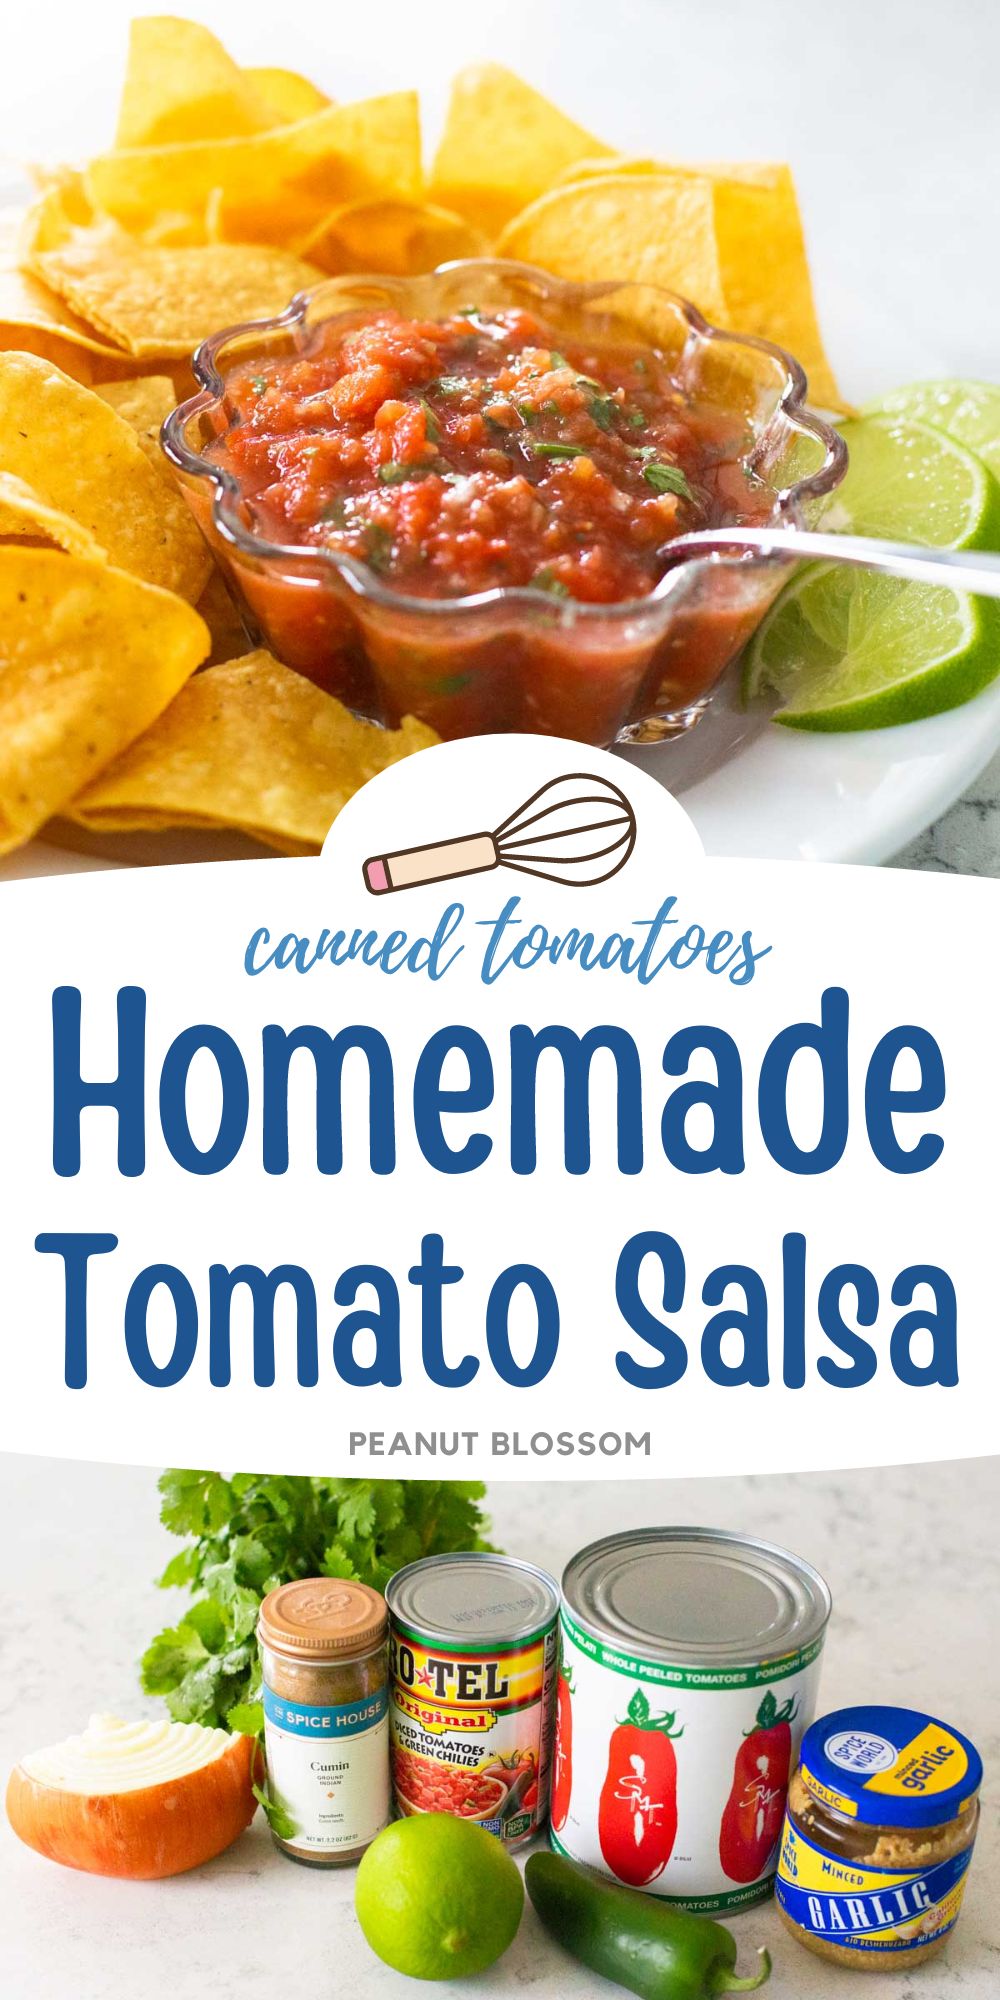 The photo collage shows the salsa in a bowl with tortilla chips on the side next to a photo of the ingredients to make it.